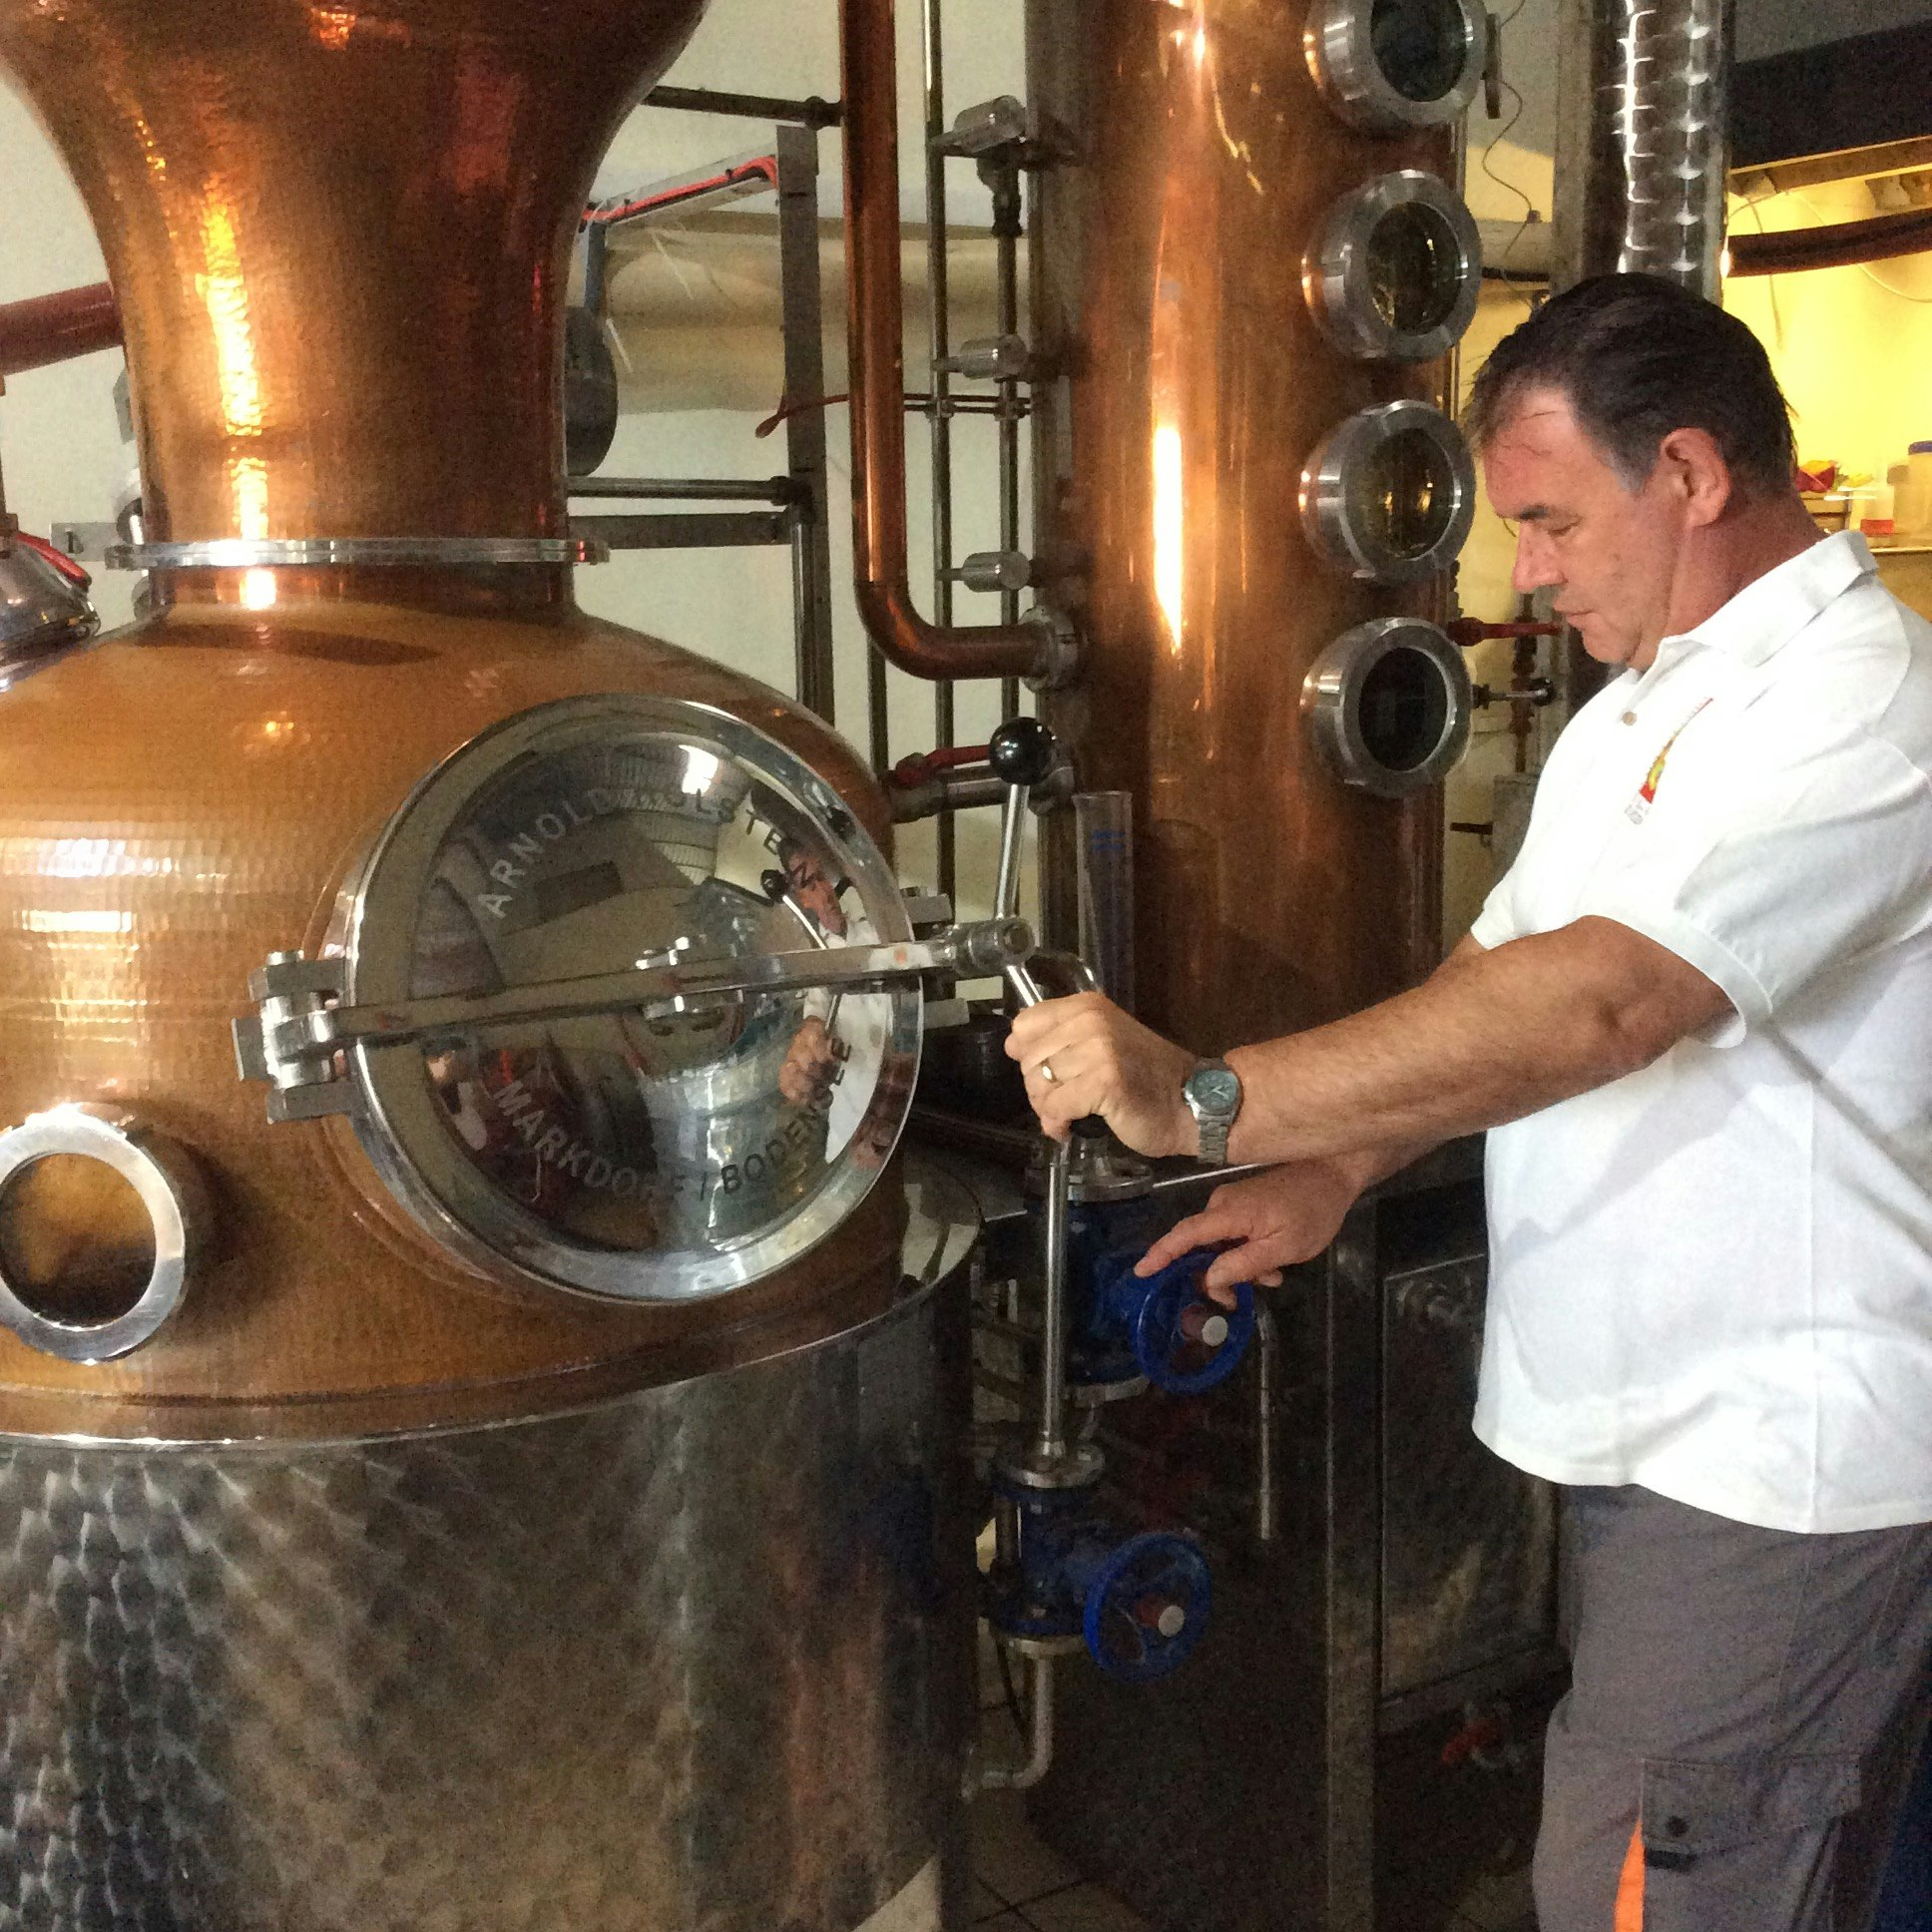 Paul Hickling standing in front of large brass distillery equipment.